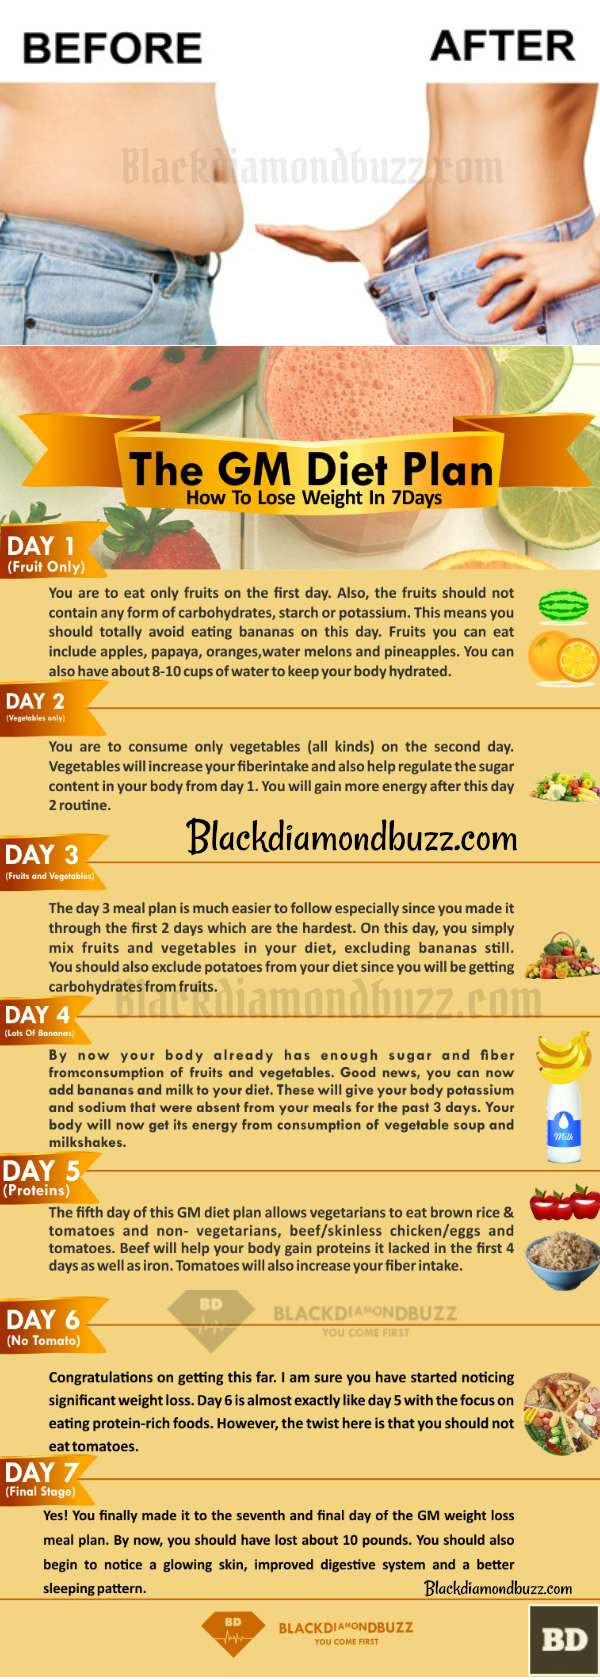 Low Fat Diet Plan Losing Weight
 Weight Loss Meal Plan 7 Days GM Diet Plan for Fat Loss at